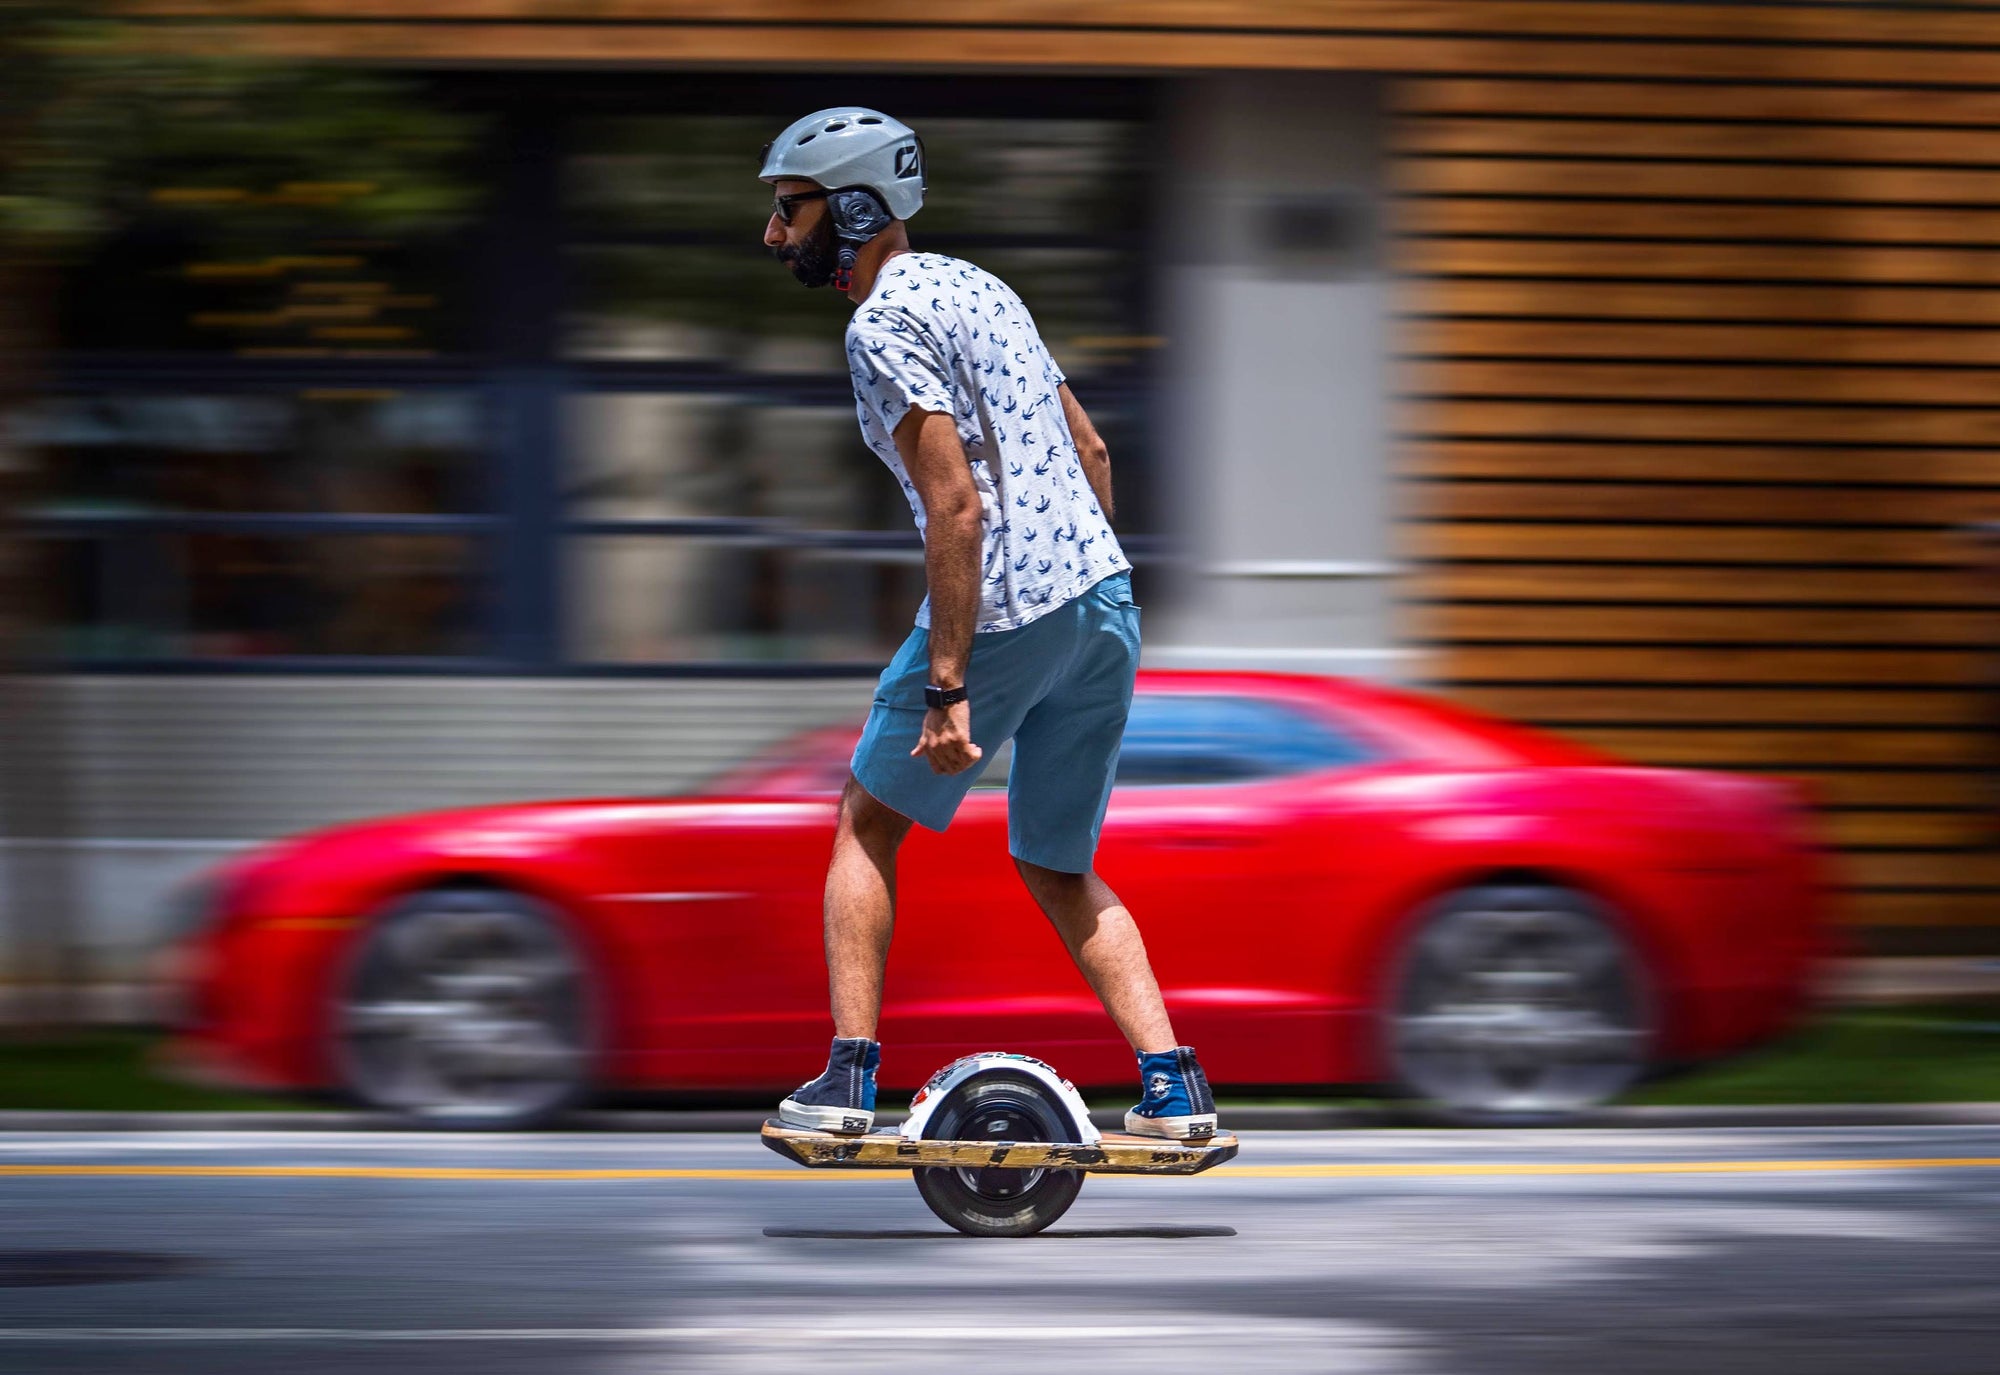 OneWheel [An Exhaustive Guide]